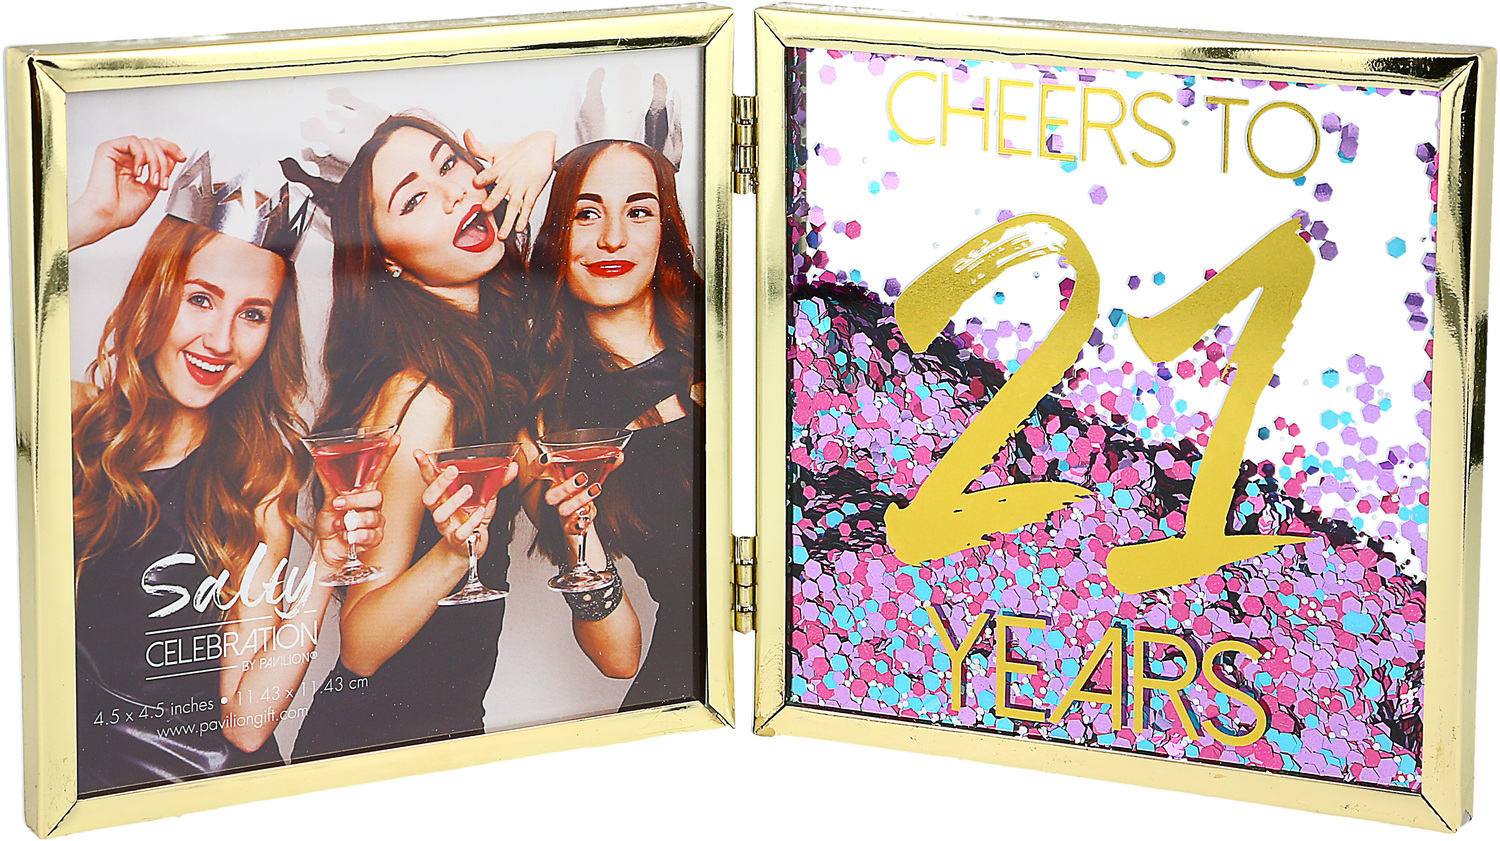 Cheers to 21 by Salty Celebration - Cheers to 21 - 4.75" Hinged Sentiment Frame